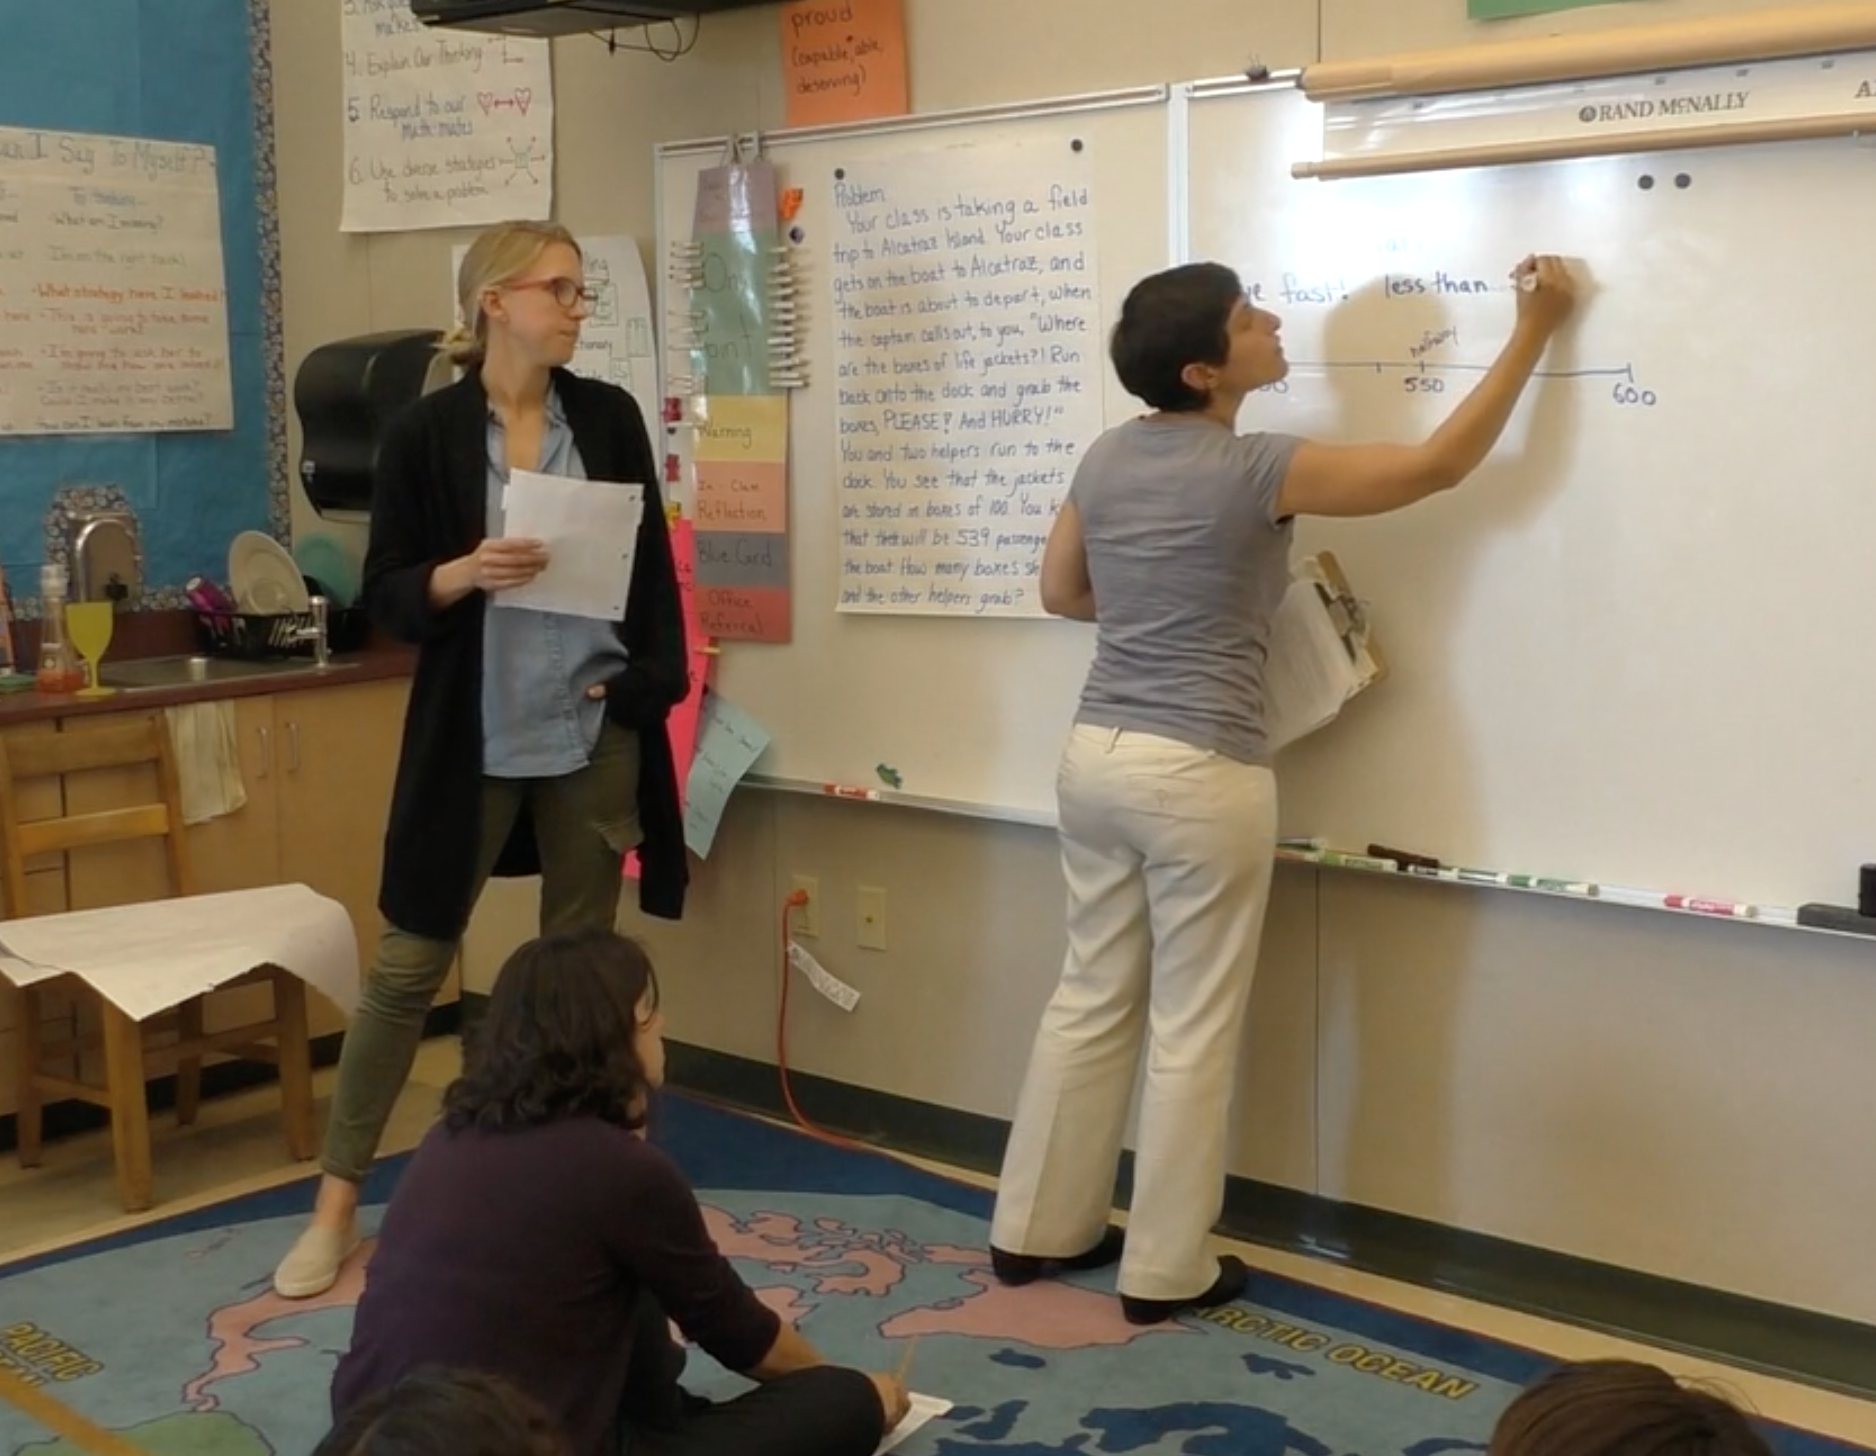 Teachers do a run-through of a lesson, with one teacher writing on a white board, another sitting on a carpet playing the student role, and a third observing